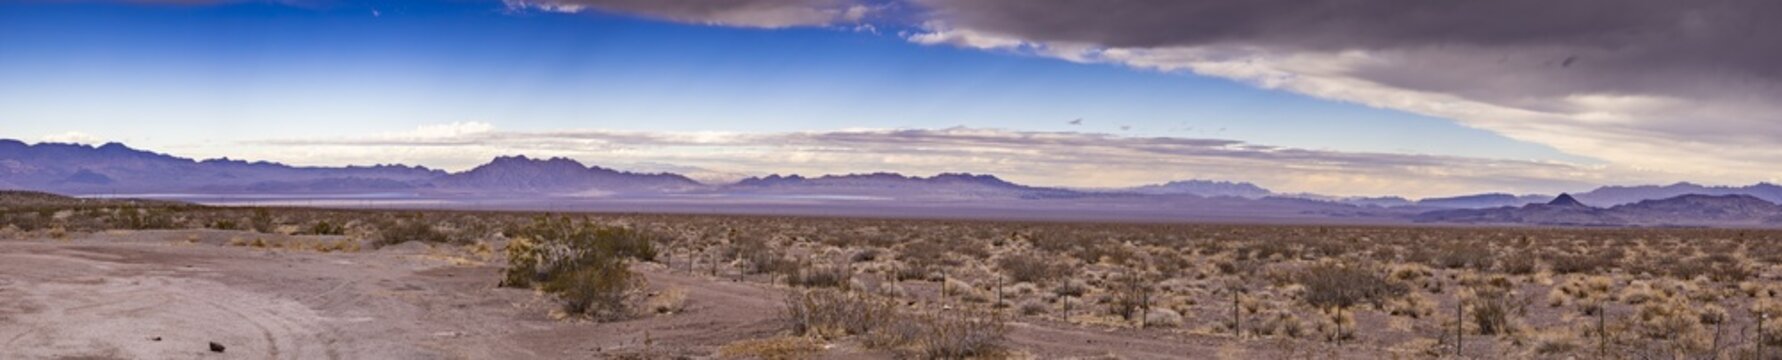 Panoramic image over Southern California desert during daytime